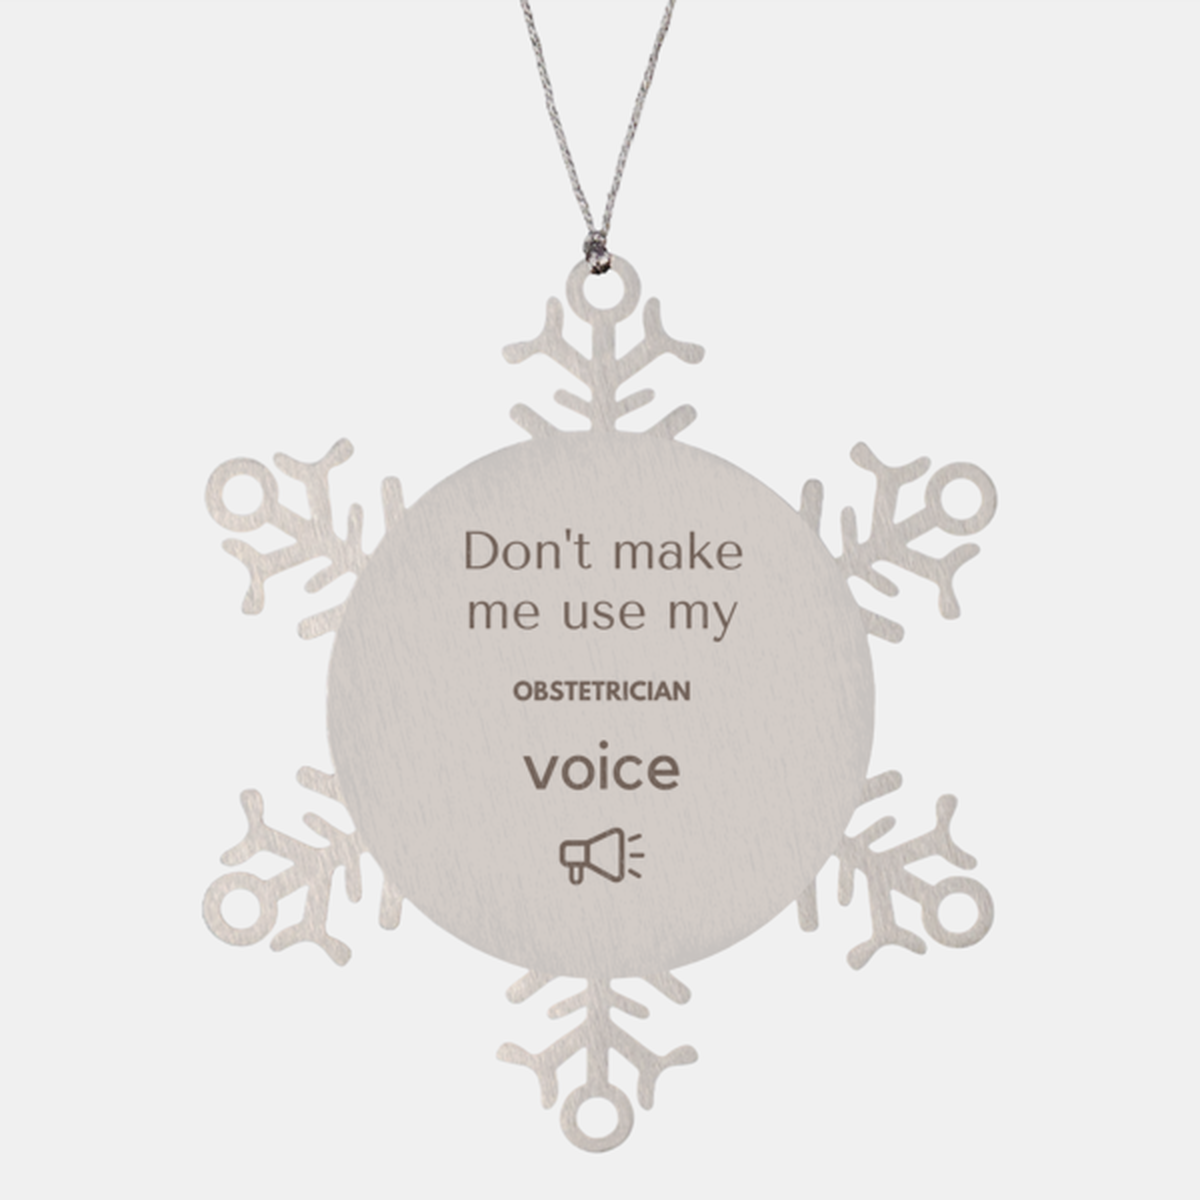 Don't make me use my Obstetrician voice, Sarcasm Obstetrician Ornament Gifts, Christmas Obstetrician Snowflake Ornament Unique Gifts For Obstetrician Coworkers, Men, Women, Colleague, Friends